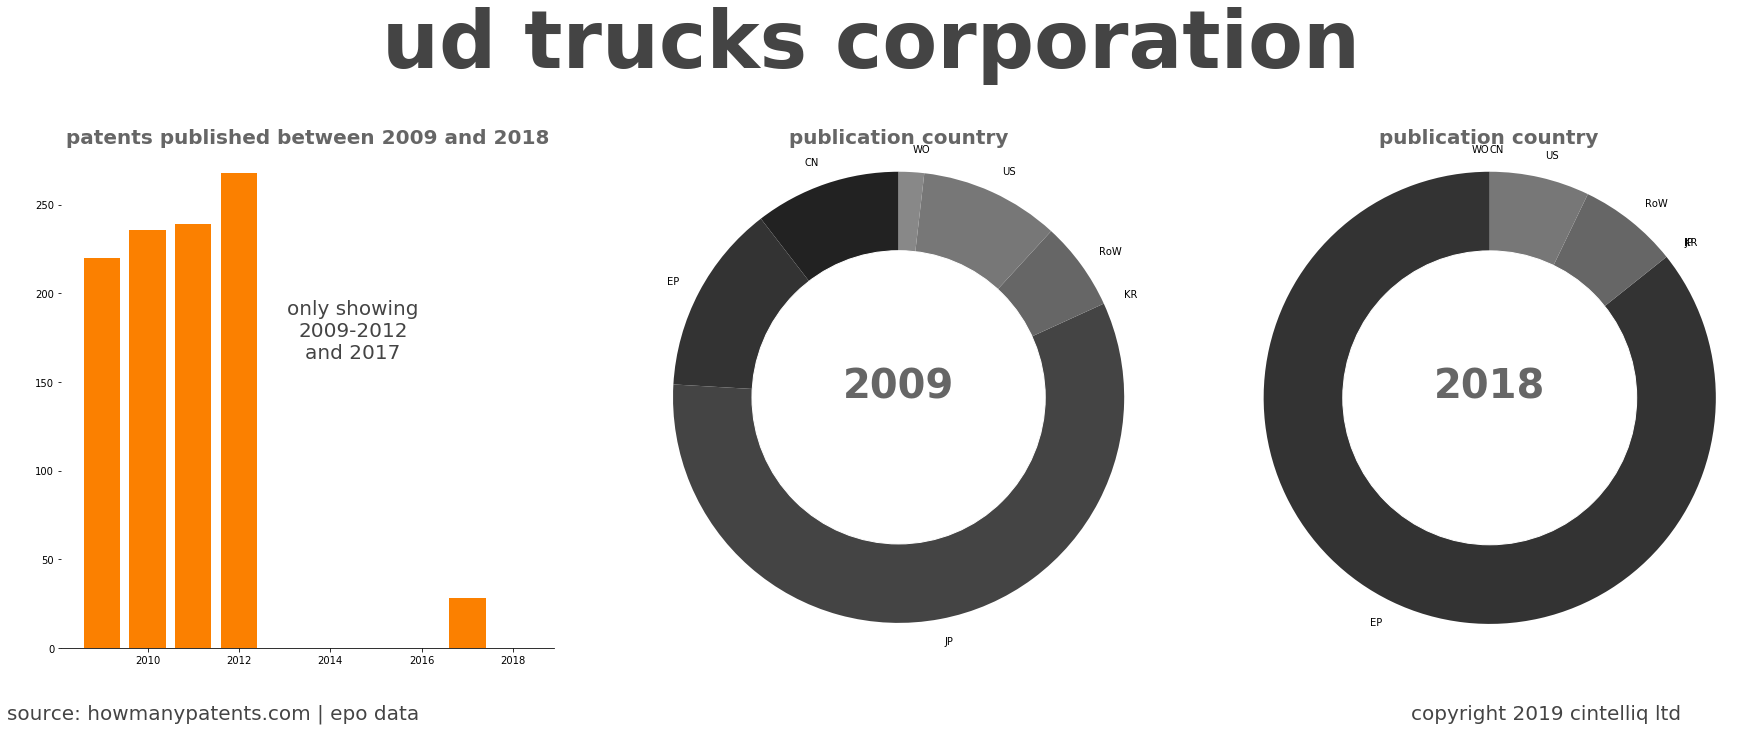 summary of patents for Ud Trucks Corporation